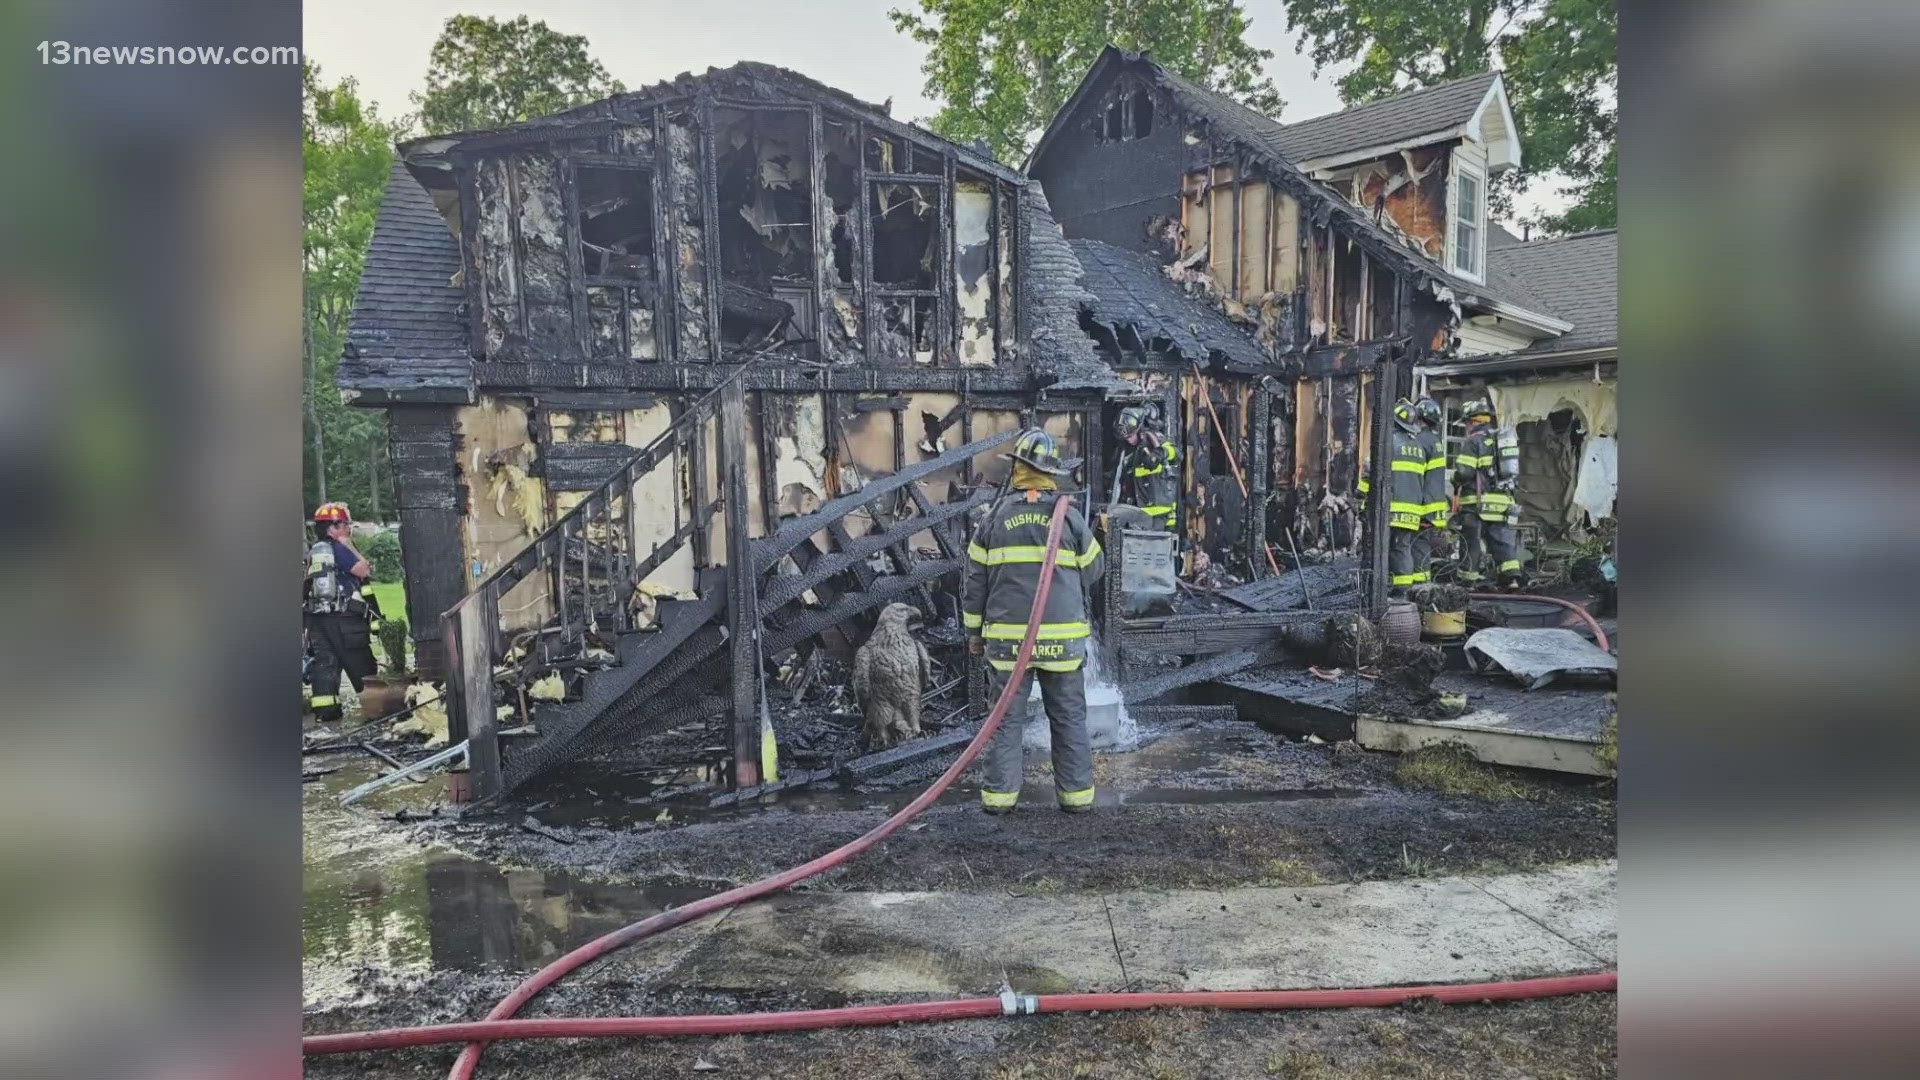 In Isle of Wight County, a fire tore through a house on Horseshoe Point just after 5:45 Sunday evening.